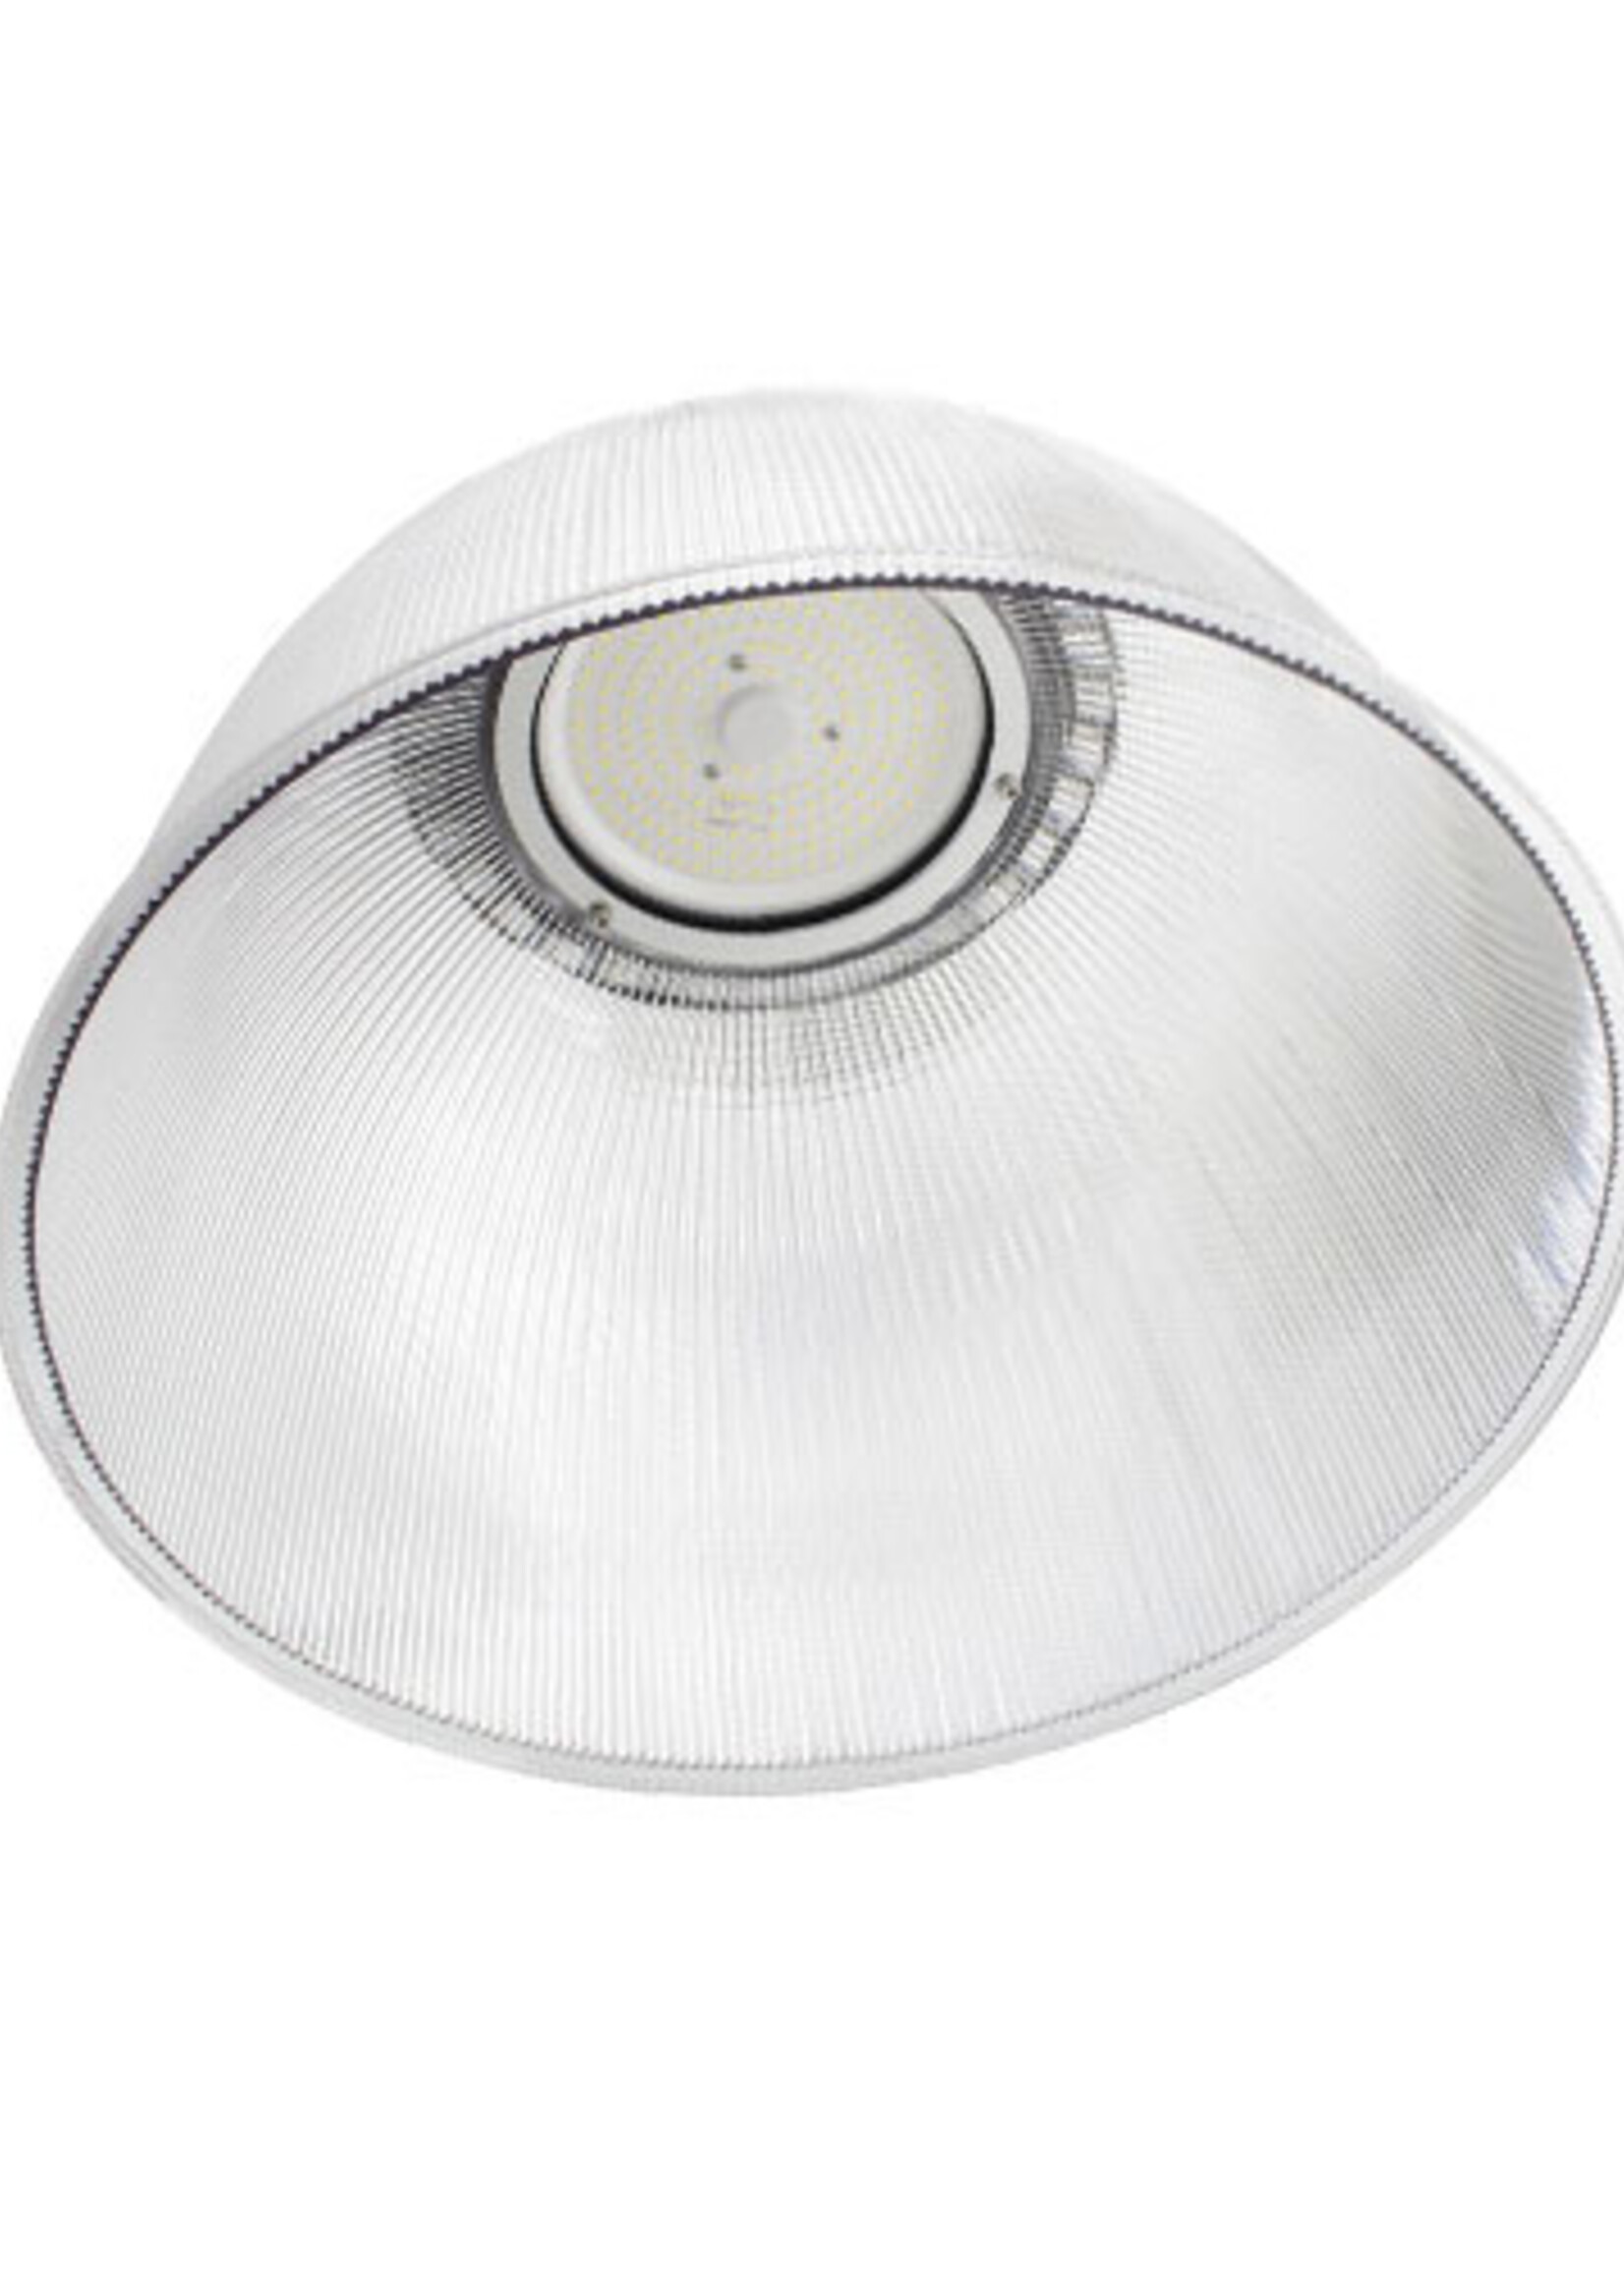 Philips Xitanium LED Driver 100W LED UFO Highbay IP65 150lm/W Philips dimmable driver